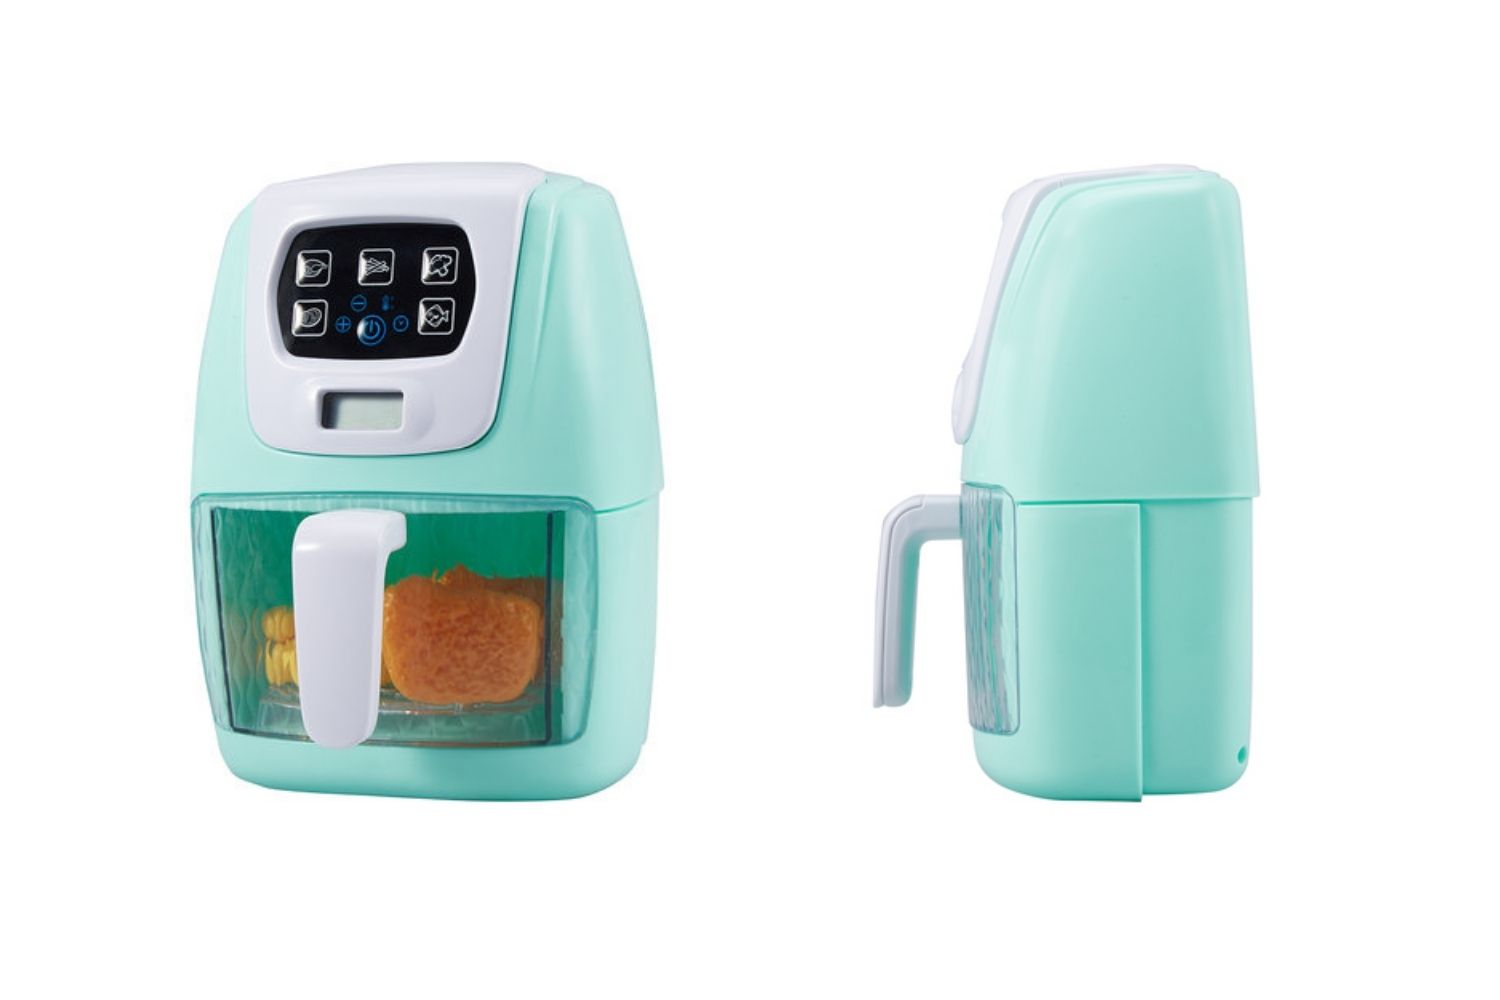 OMG, Kmart toy air fryers now exist (and more!)